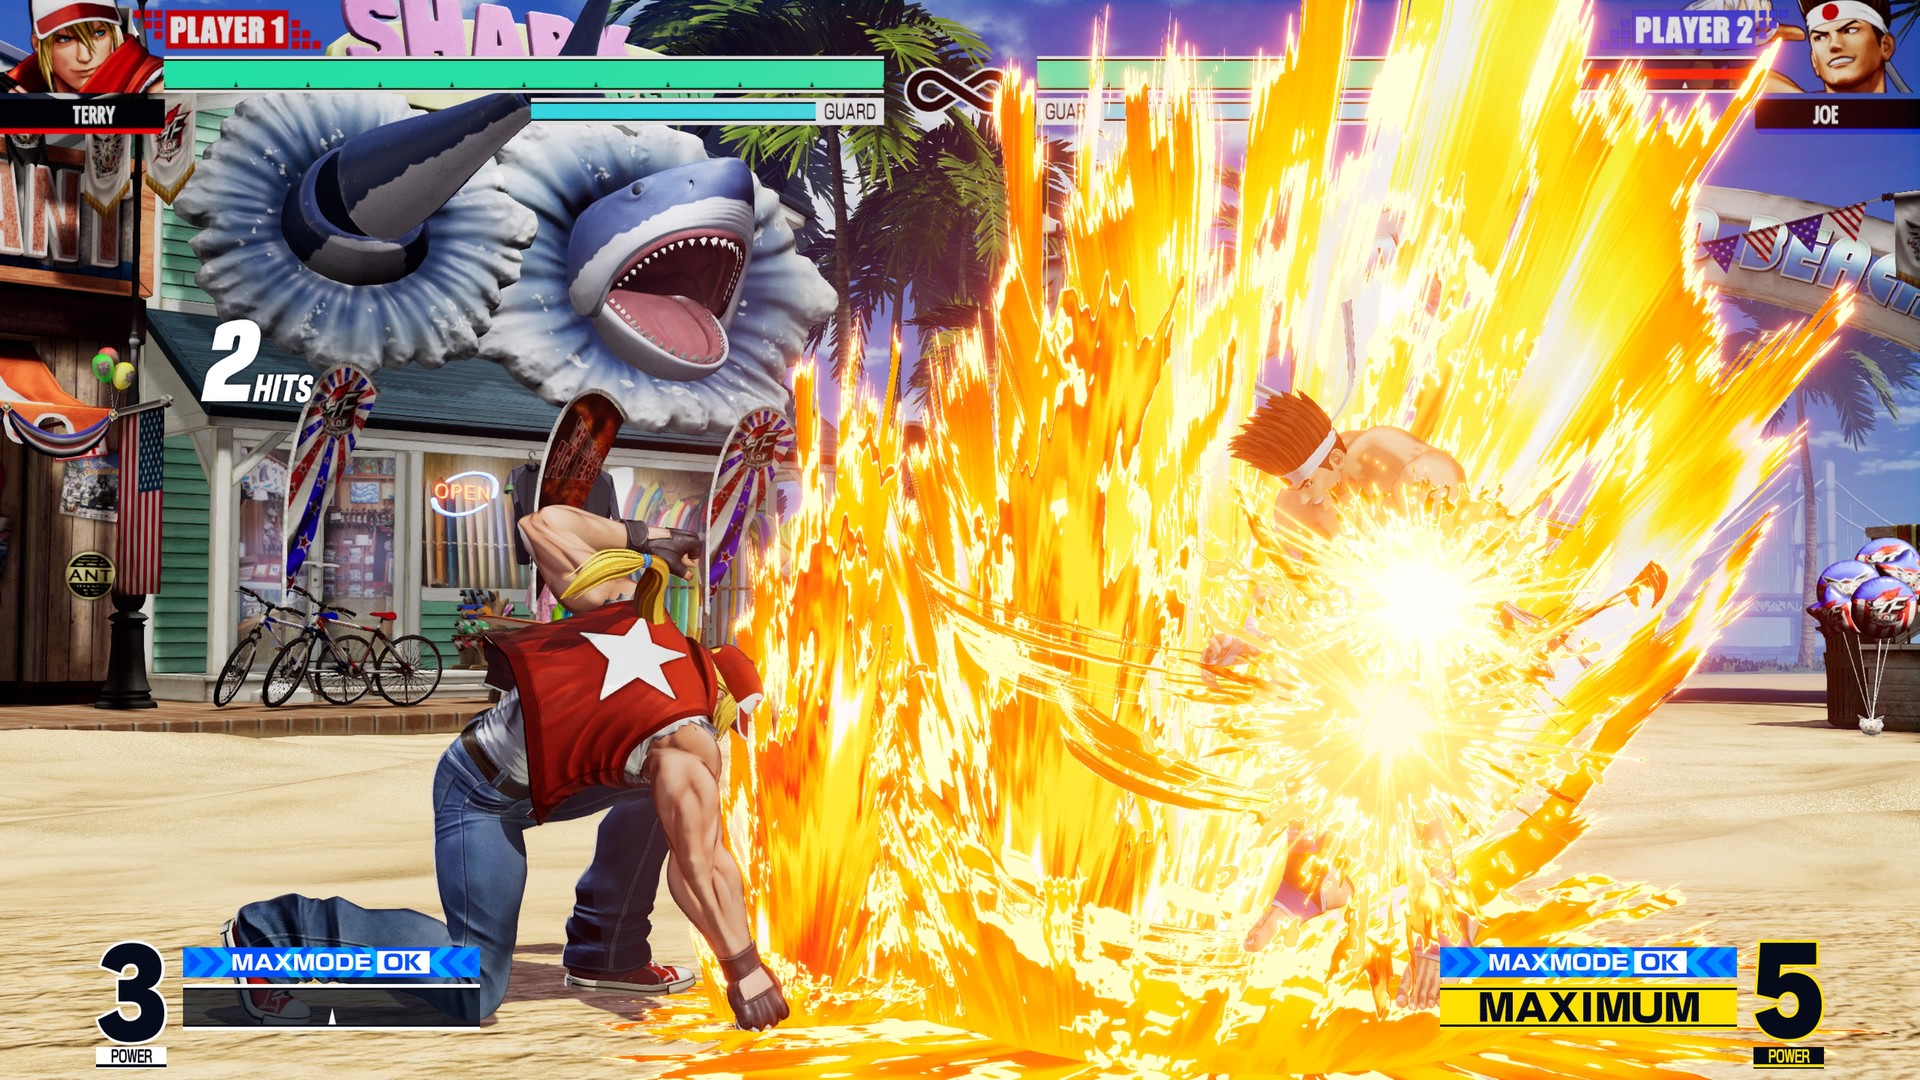 The King Of Fighters 15 screenshot